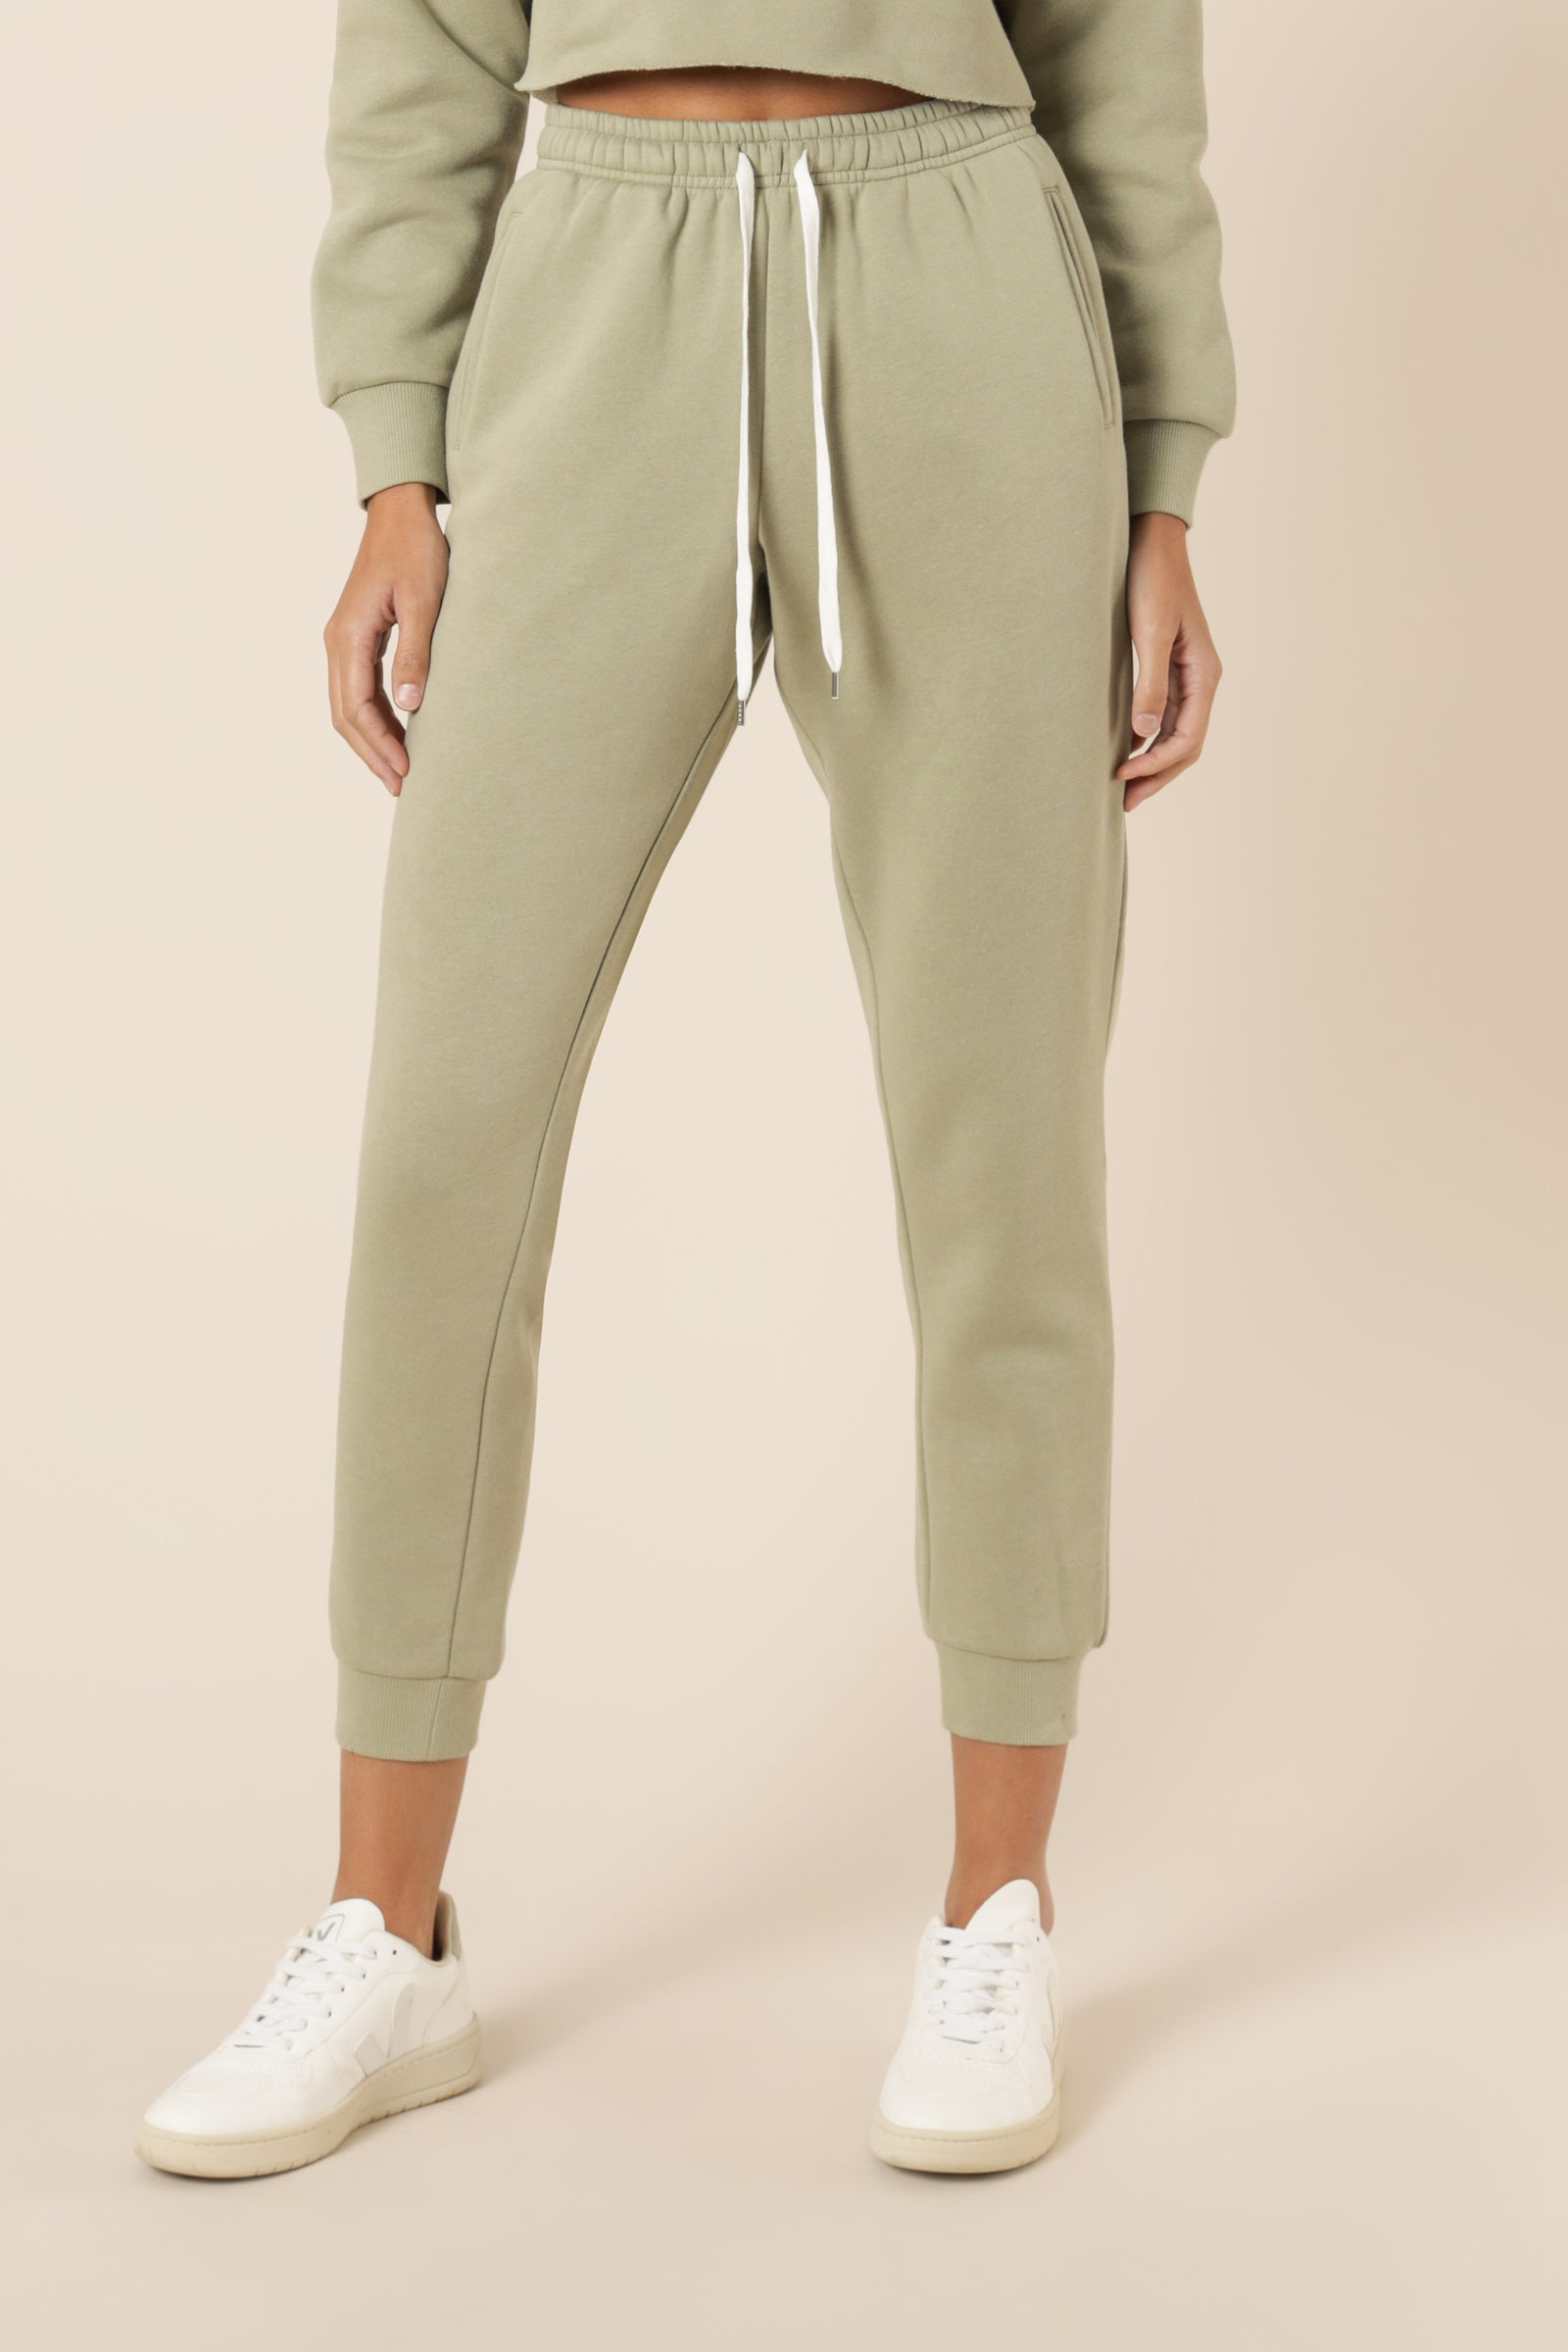 Nude Lucy Carter Classic Trackpant Washed Sage Pants 